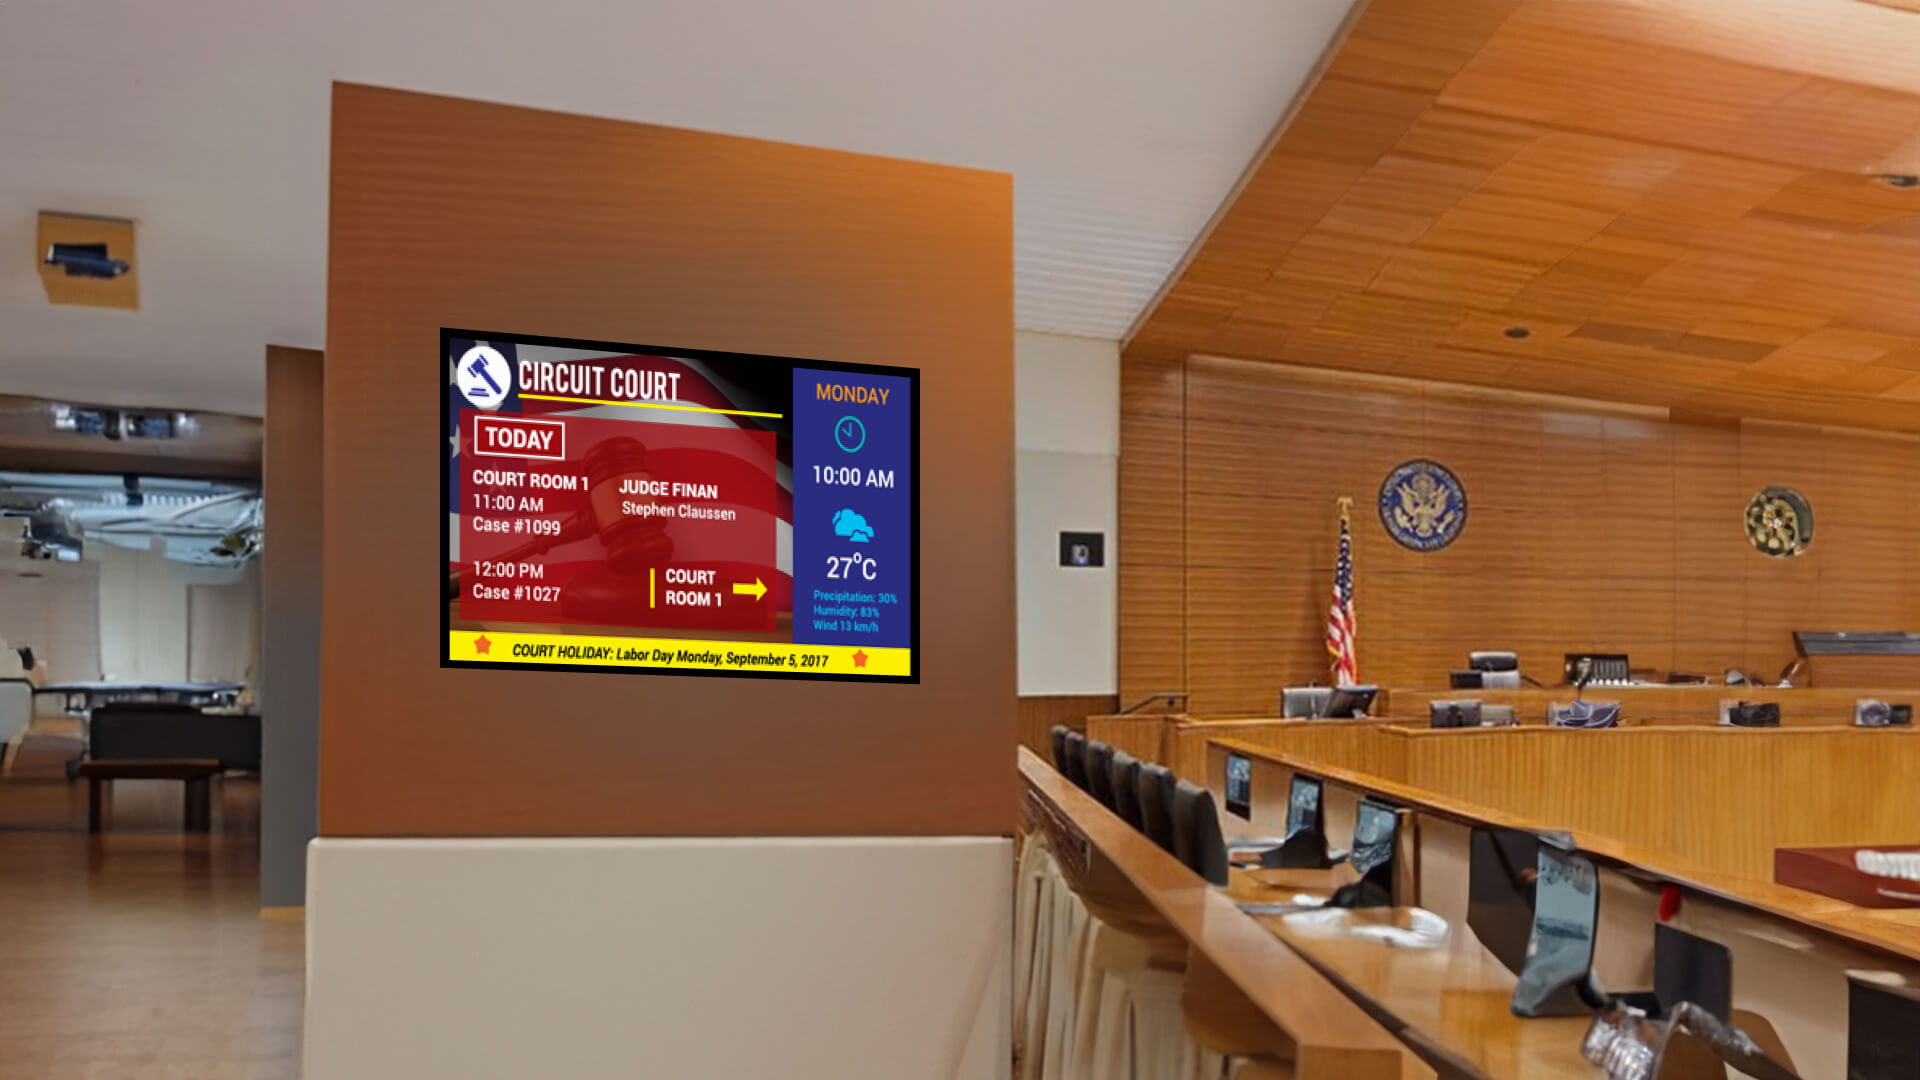  Courtroom digital signage being used for showing information catered to various people.